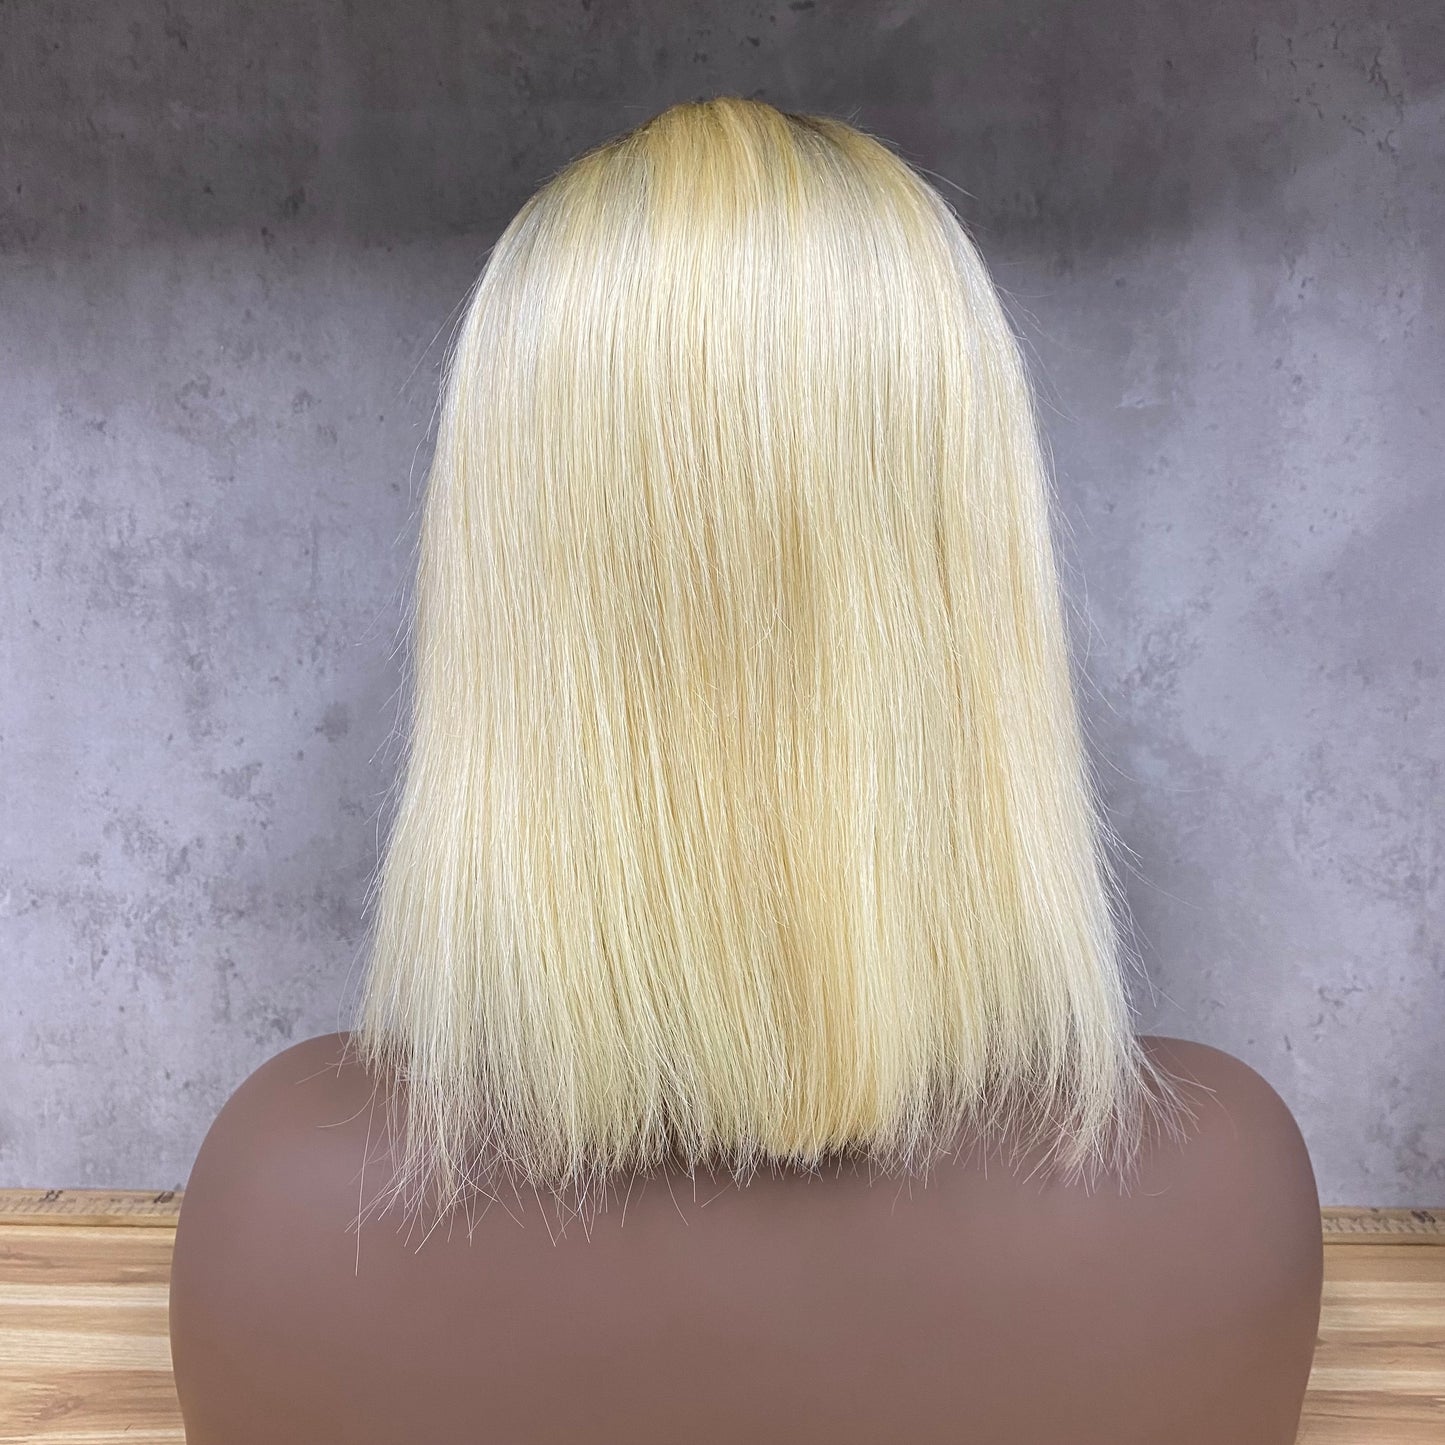 Mix Color Blonde 613 Remy Human Hair Bob Wig